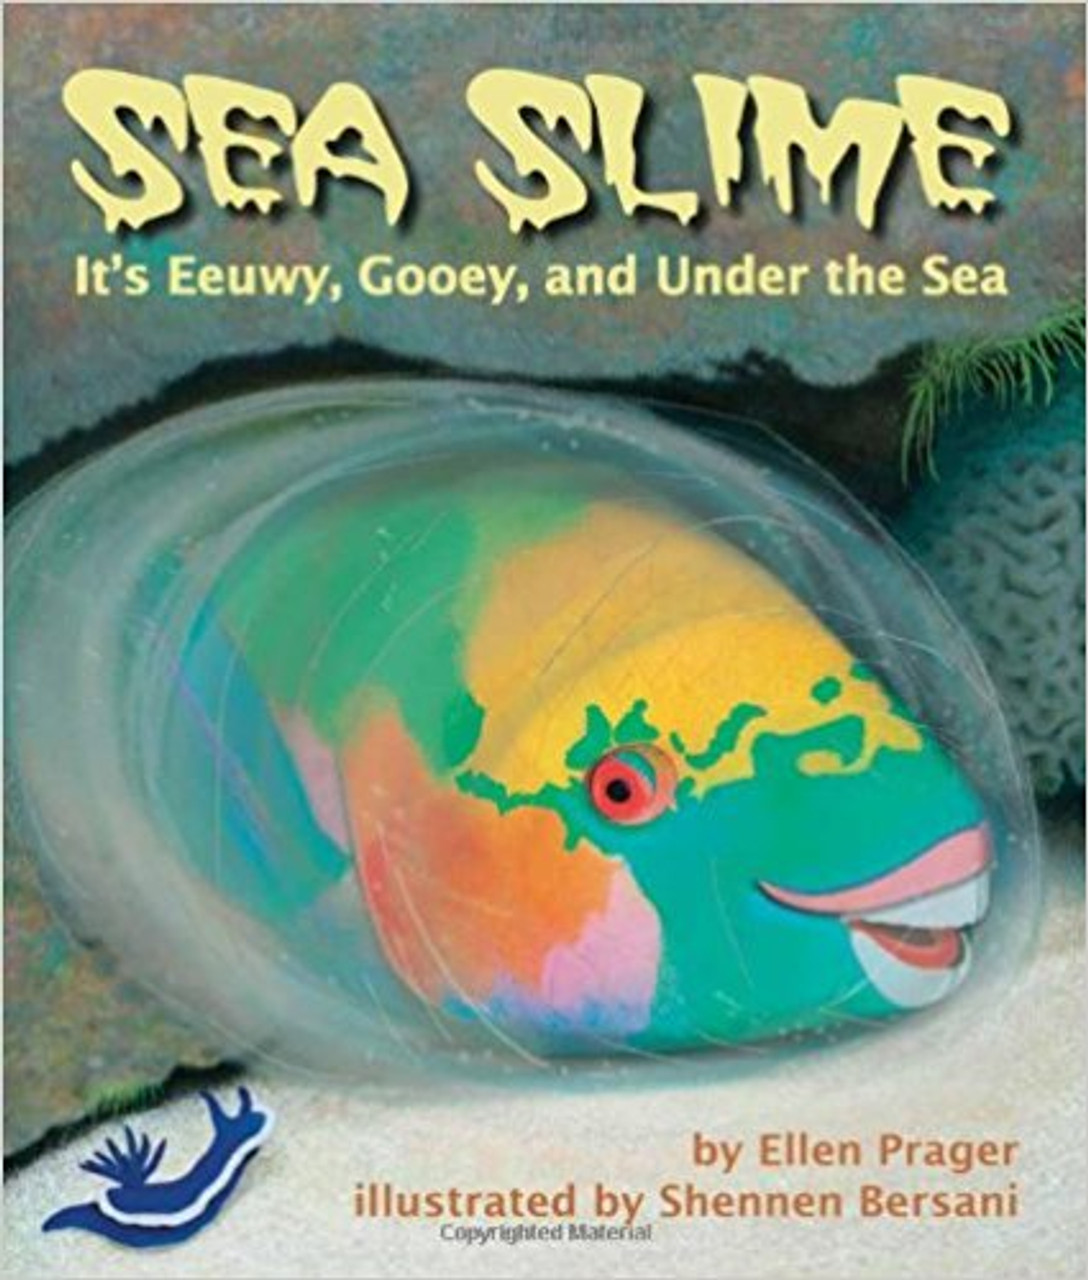 Sea Slime: It's Eeuwy, Gooey and Under the Sea by Ellen Prager